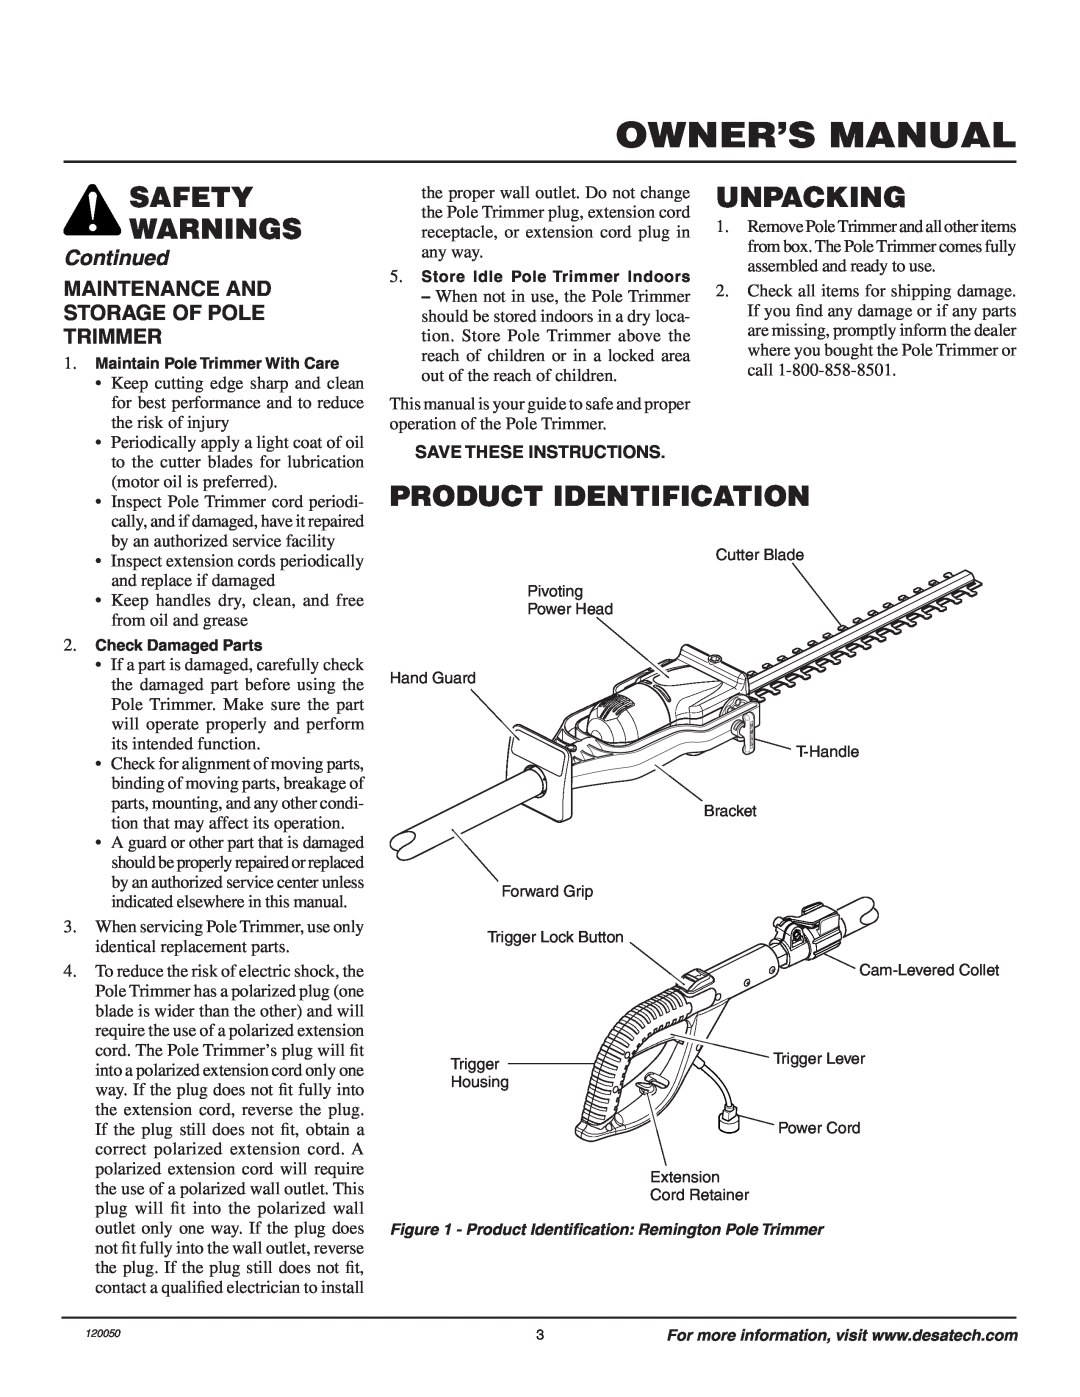 Remington AT3017BCA owner manual Unpacking, Product Identification, Continued, Safety Warnings 